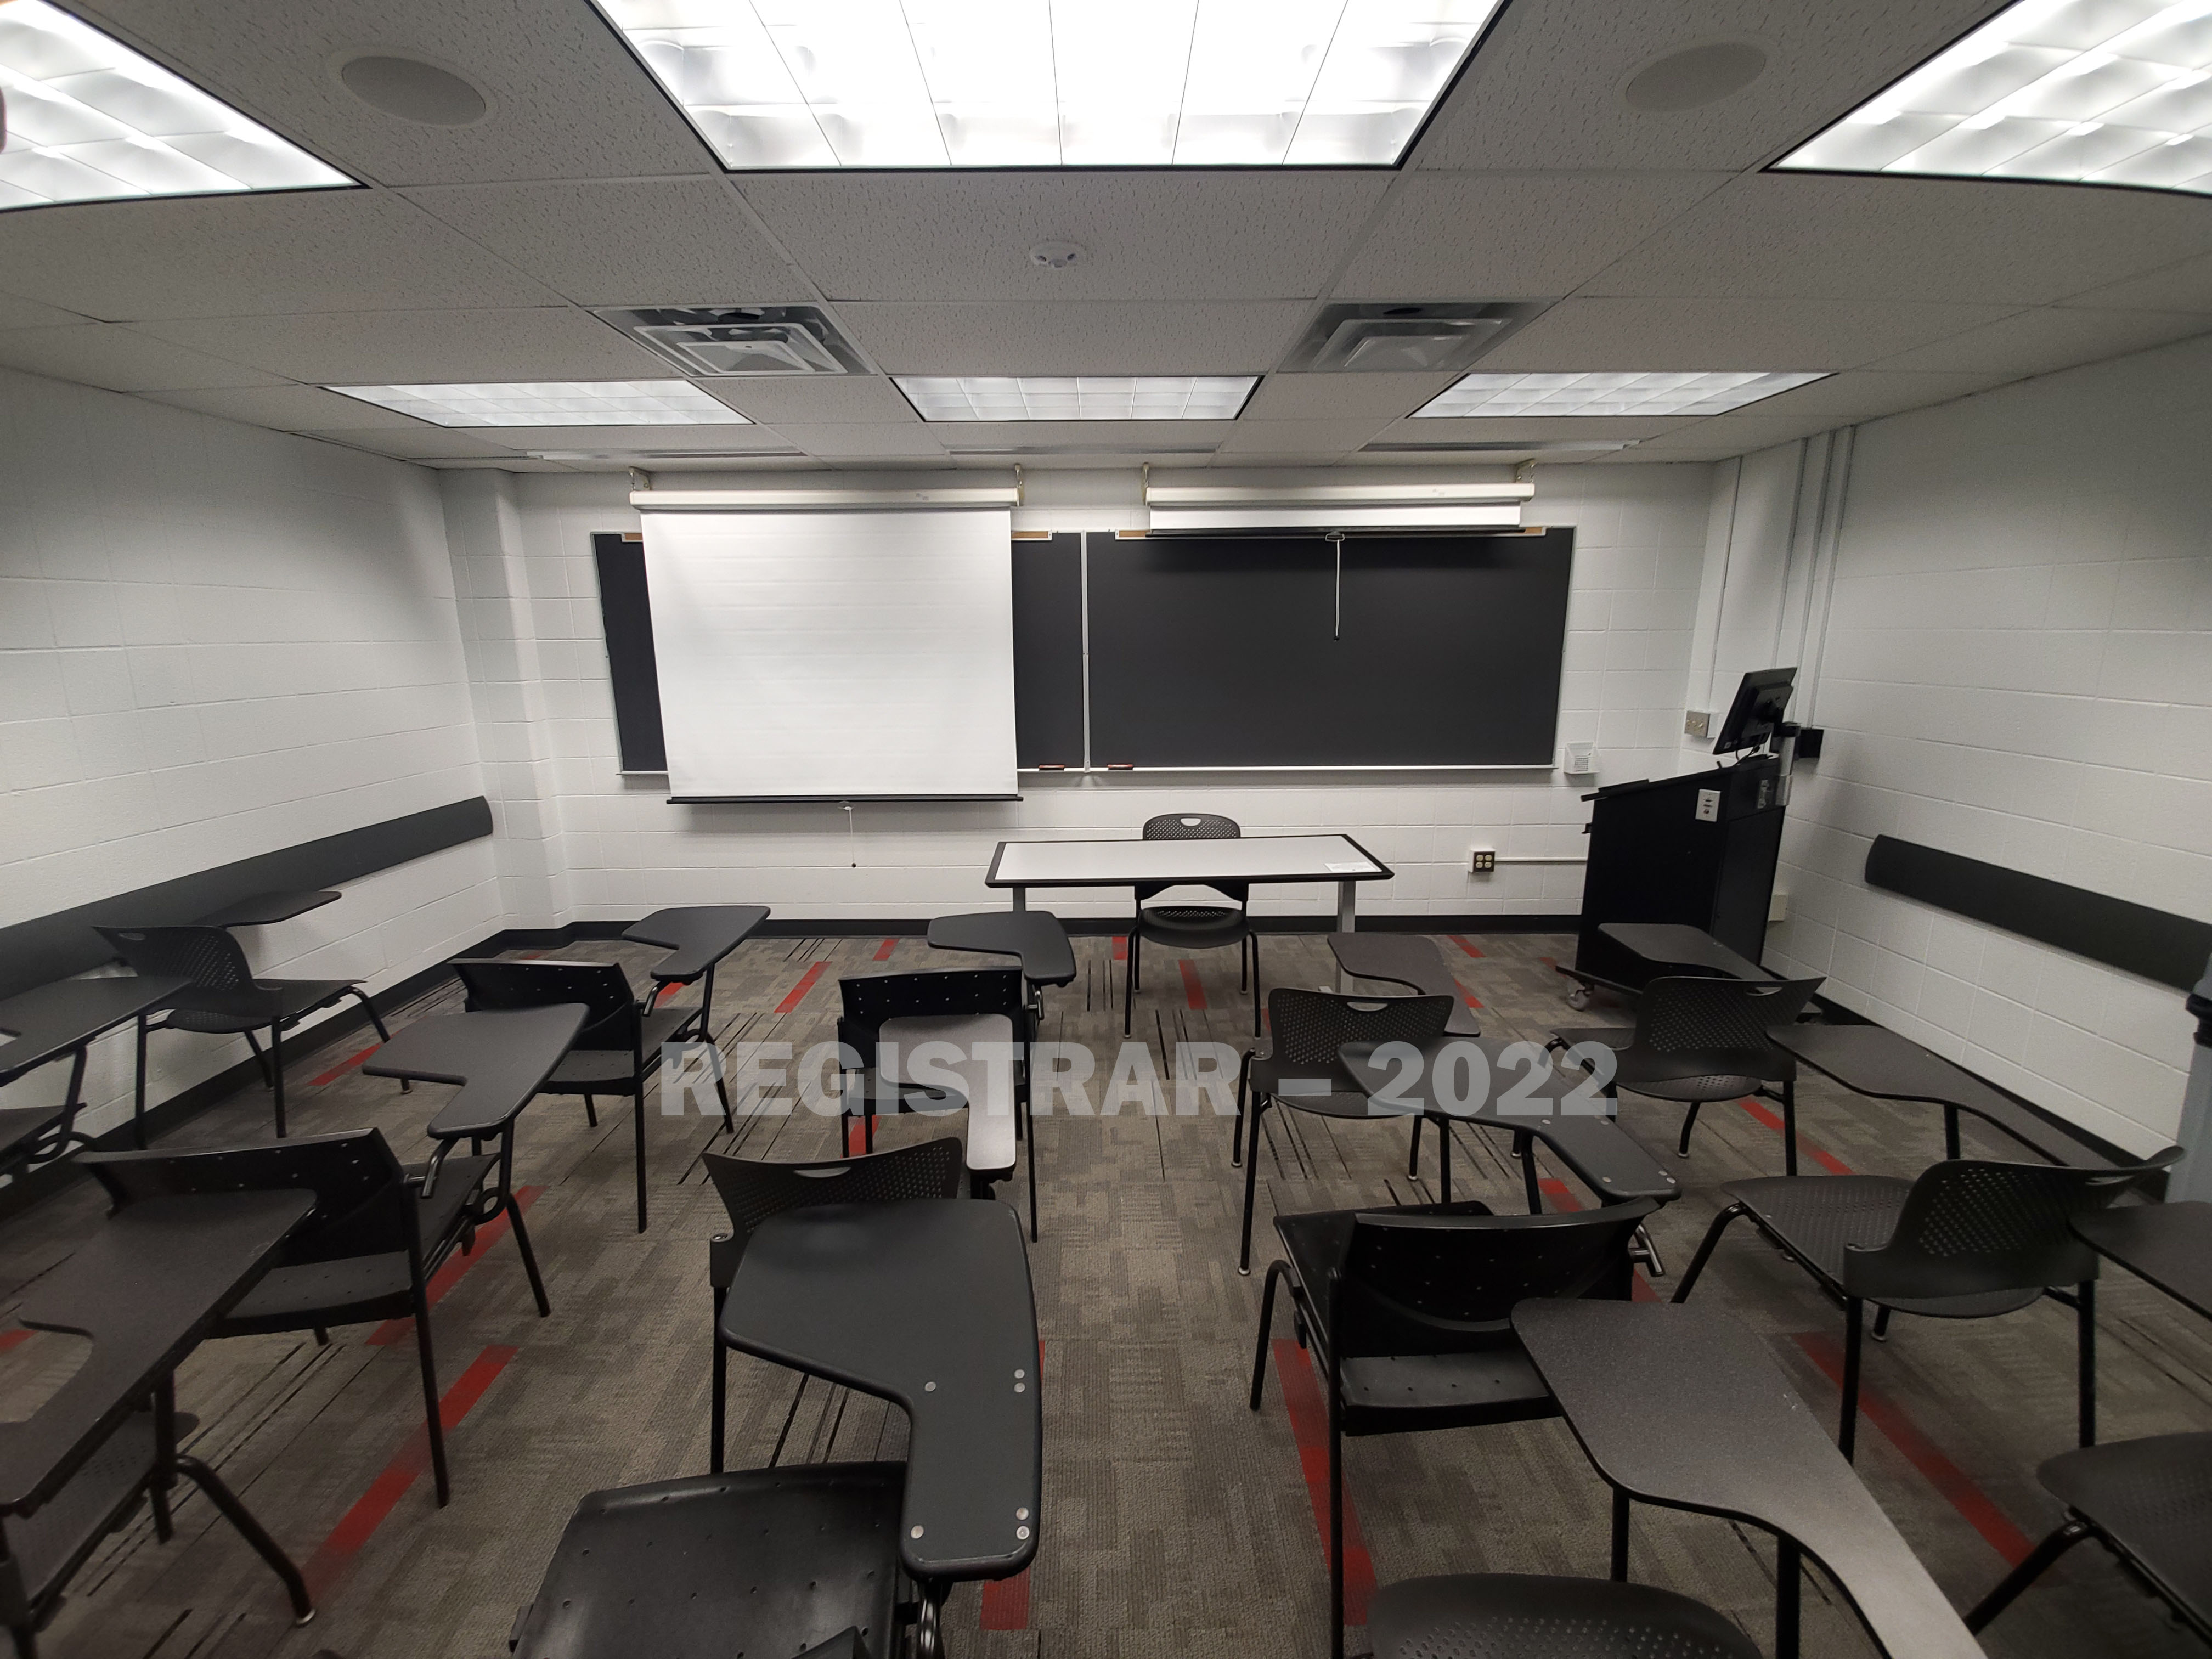 University Hall room 74 ultra wide angle view from the back of the room with projector screen down